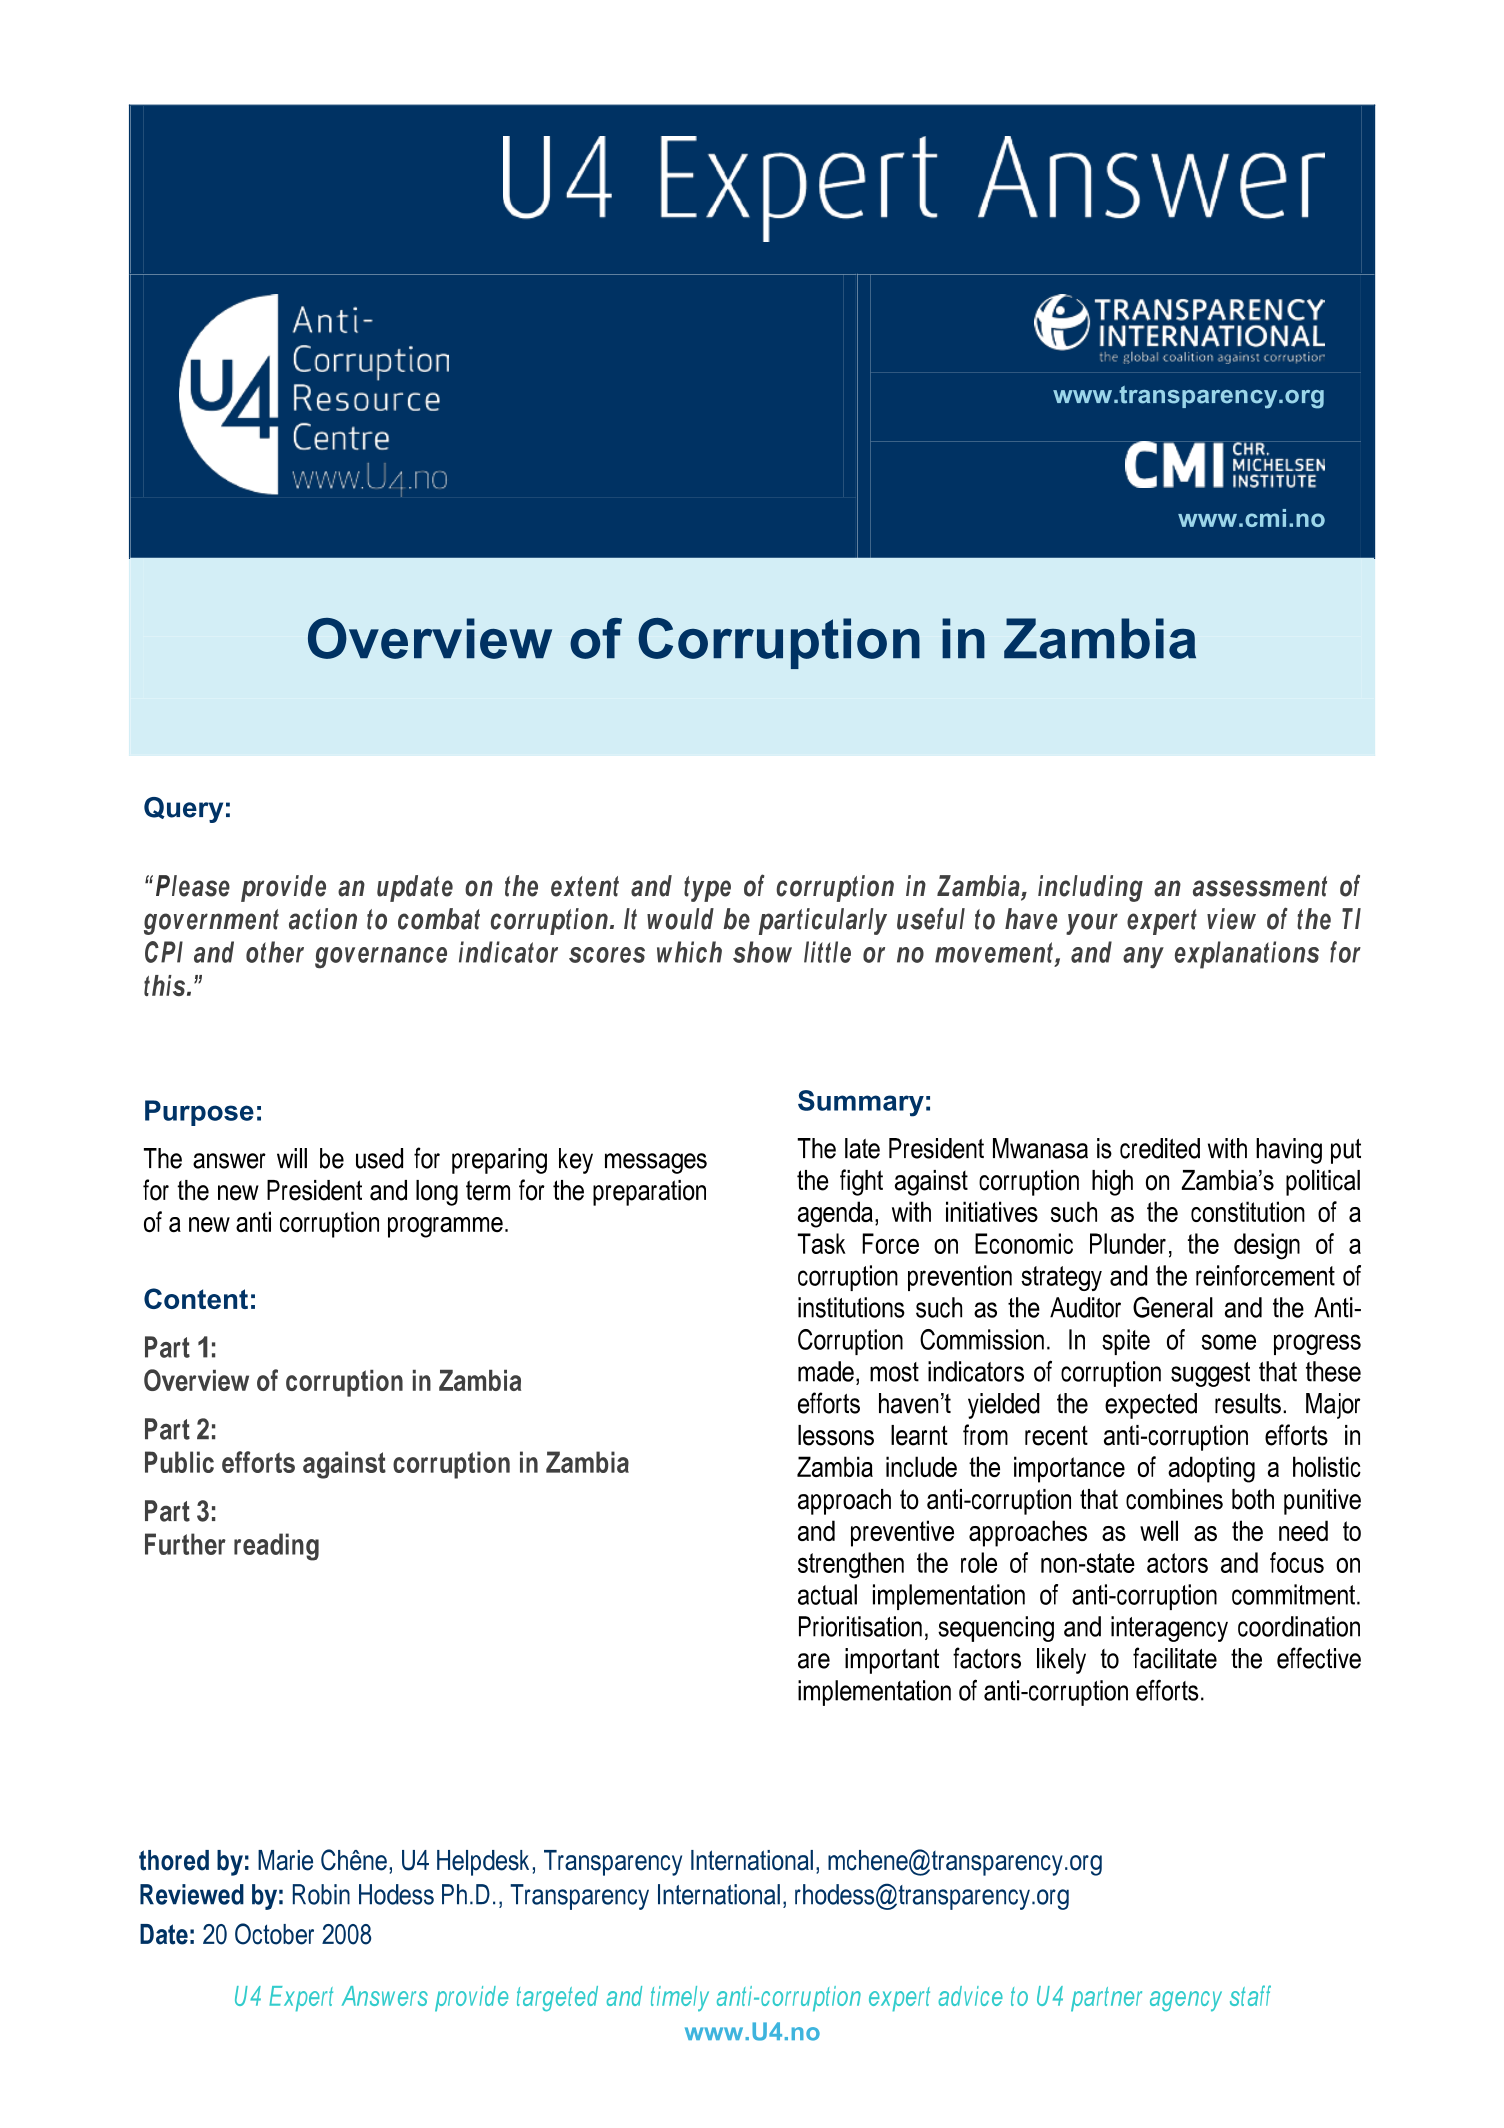 Overview of corruption in Zambia